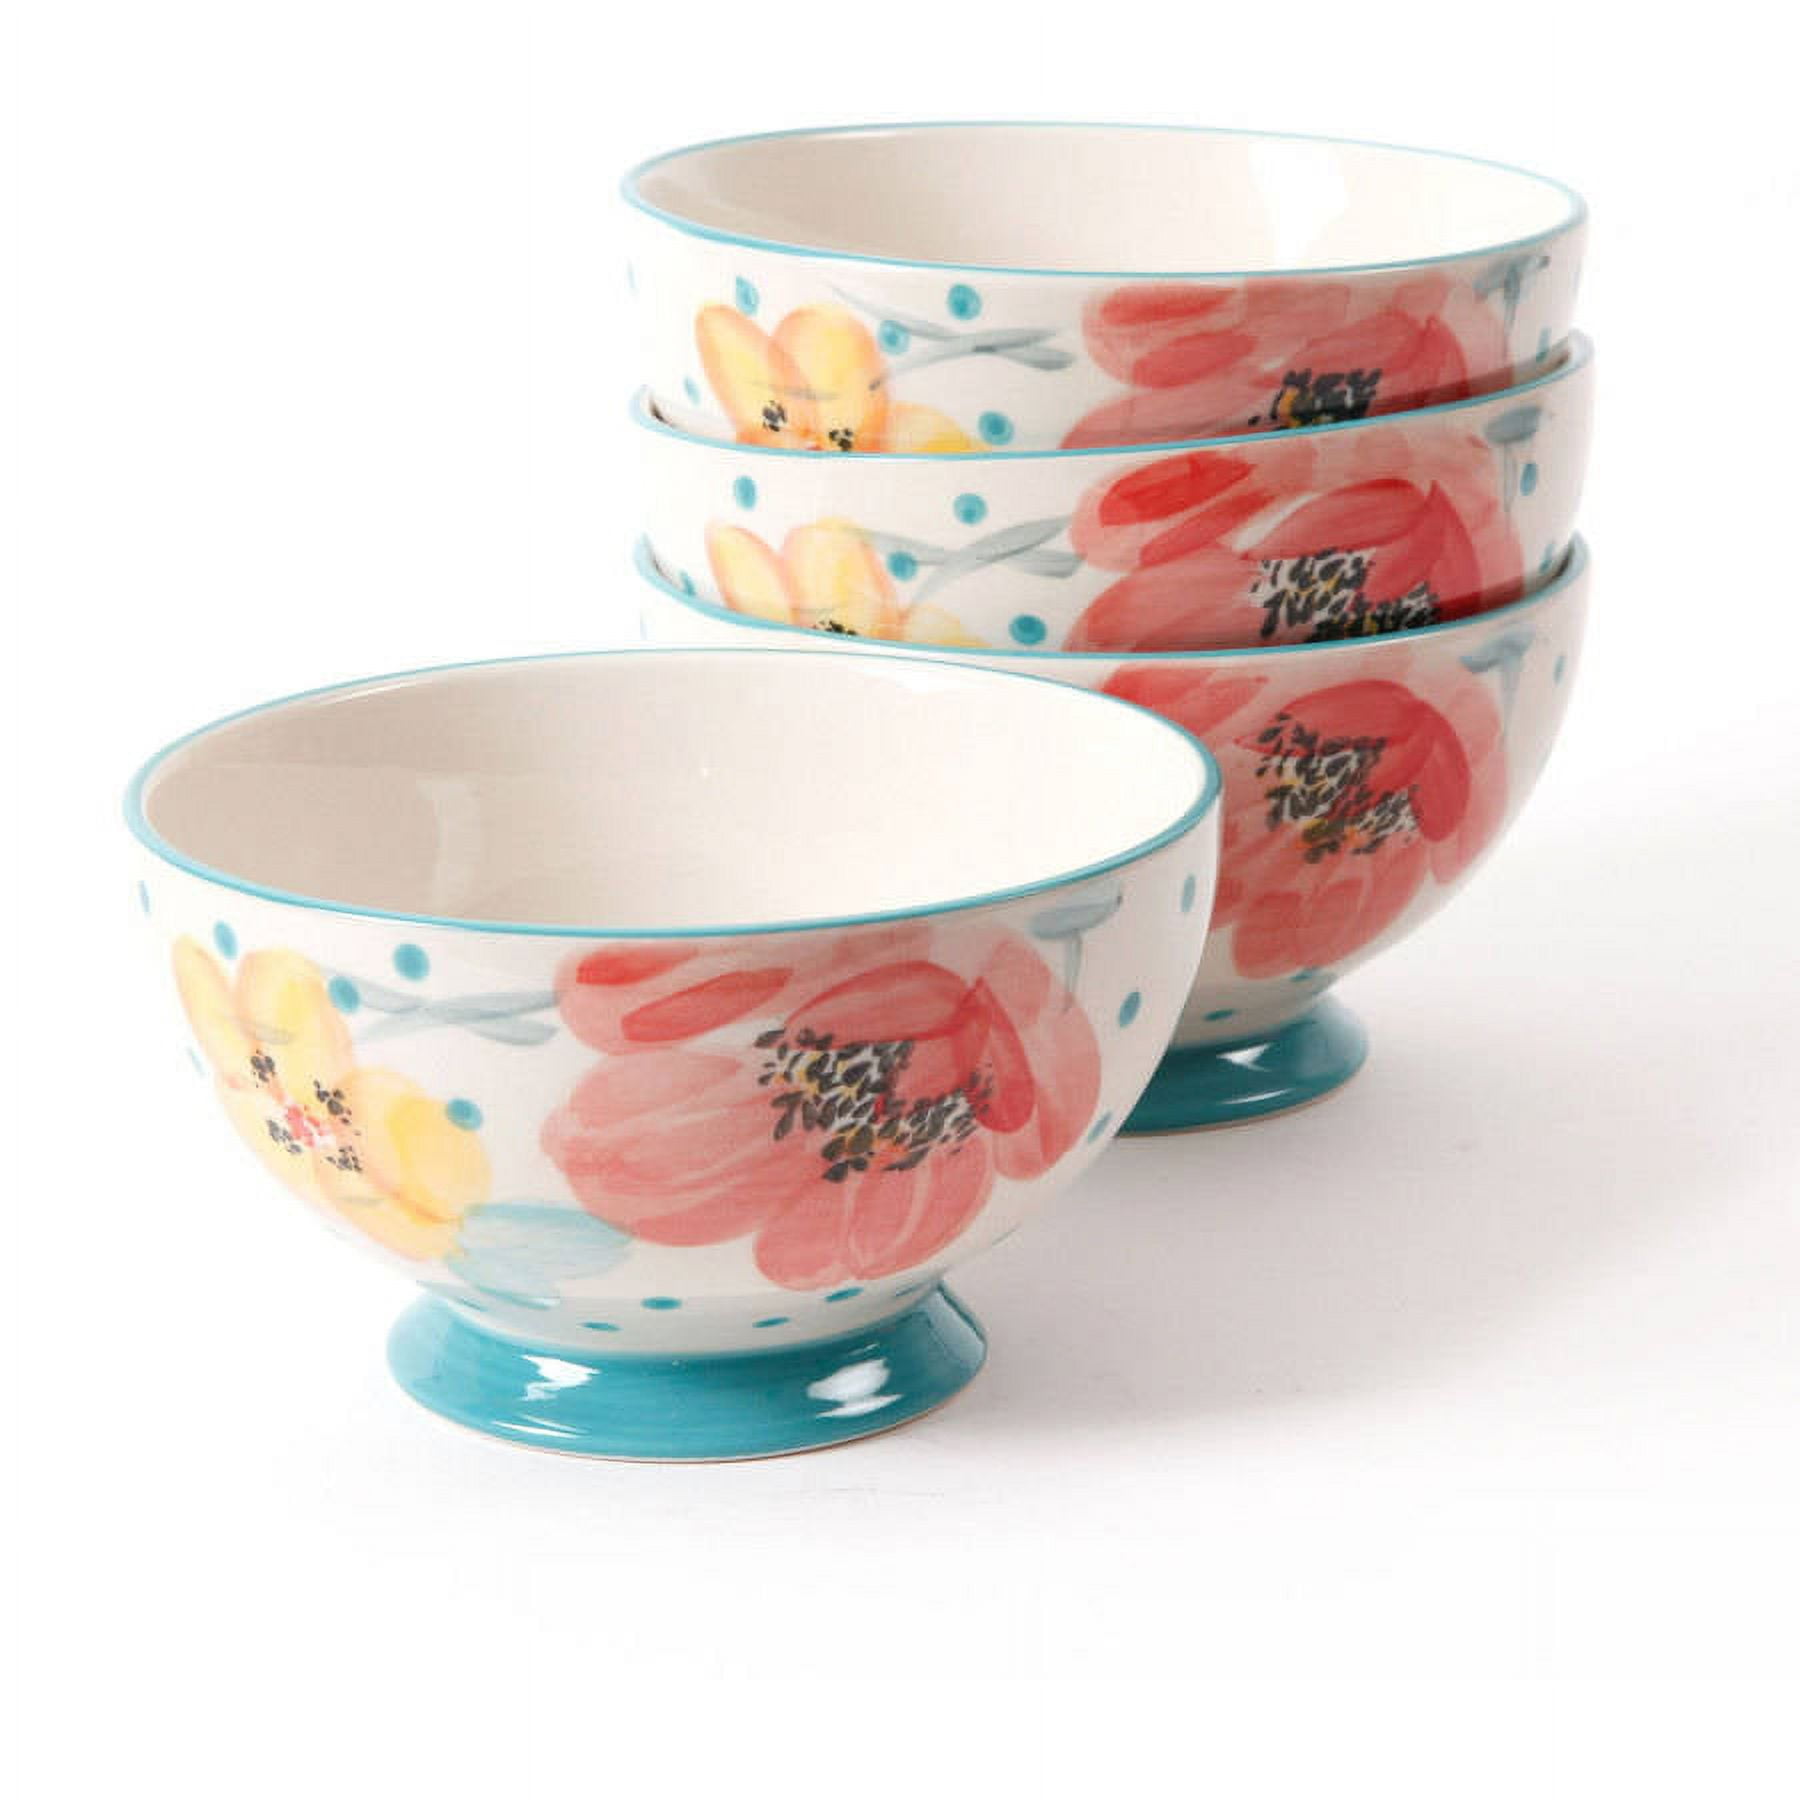 The Pioneer Woman Vintage Floral 4-Piece Footed Bowl Set